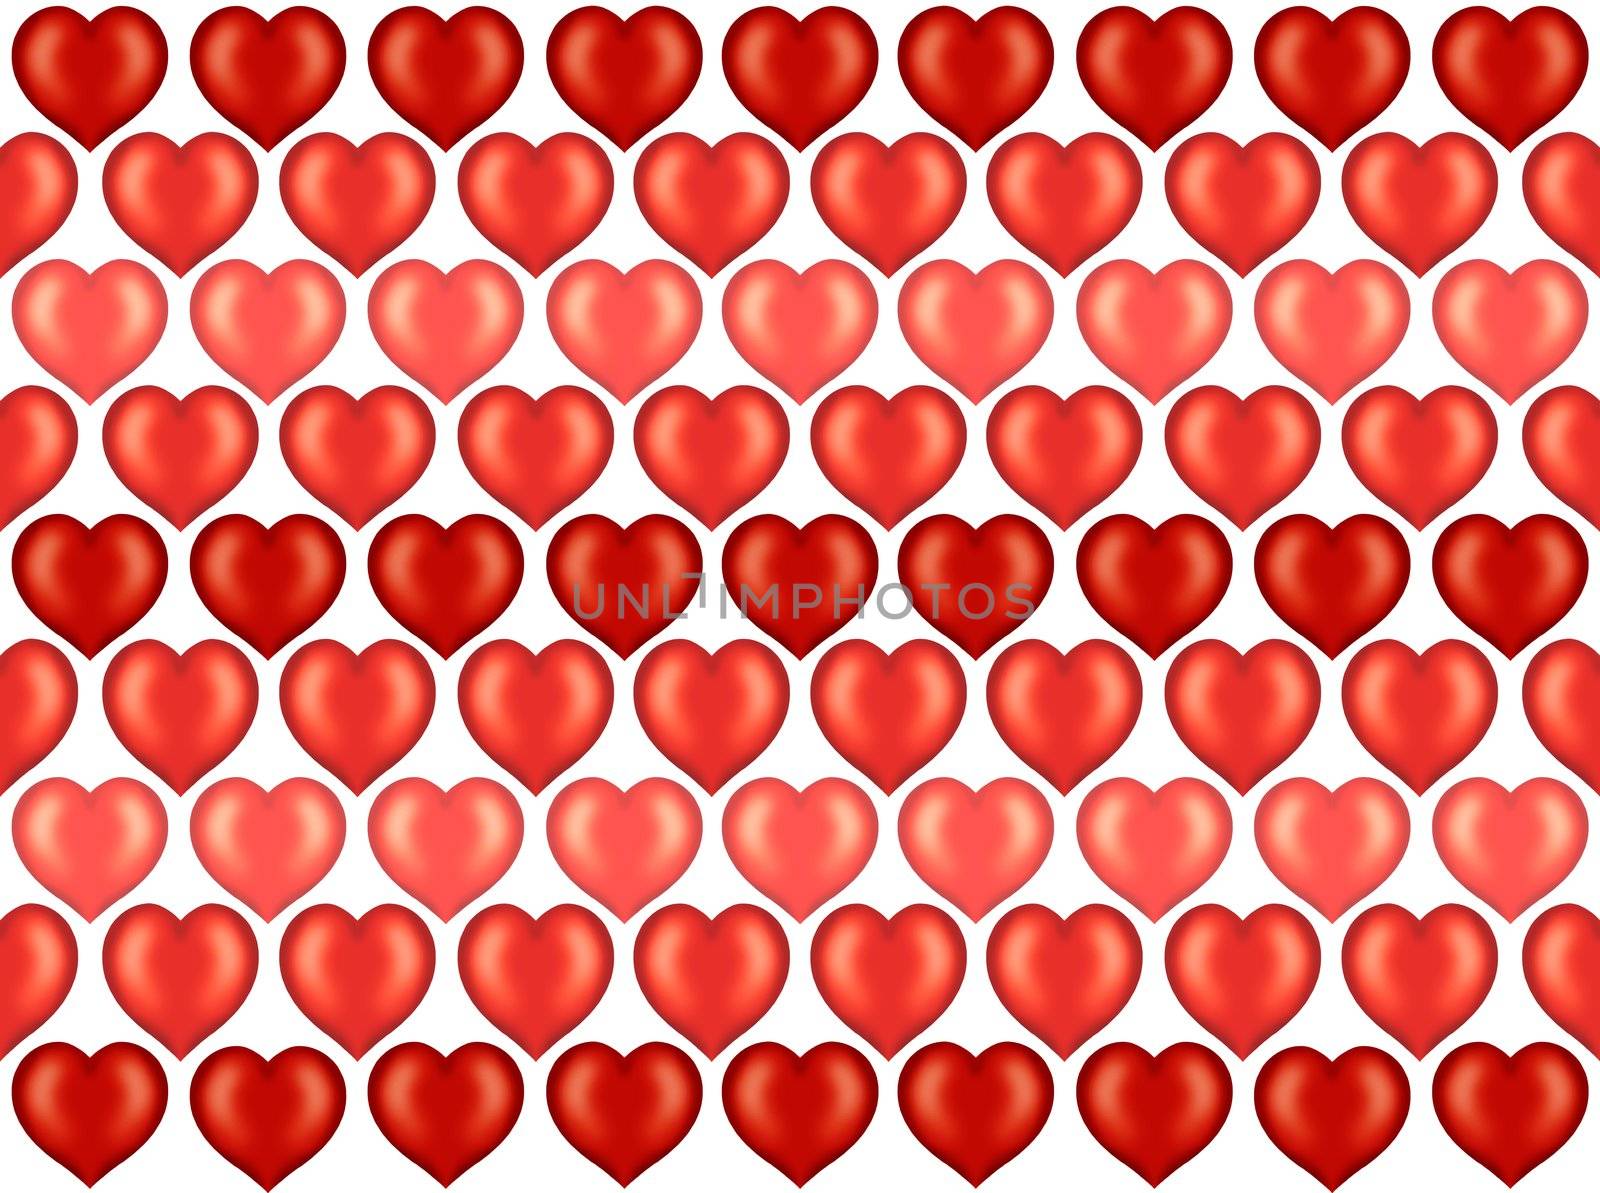 Wallpaper of red hearts pattern by acremead